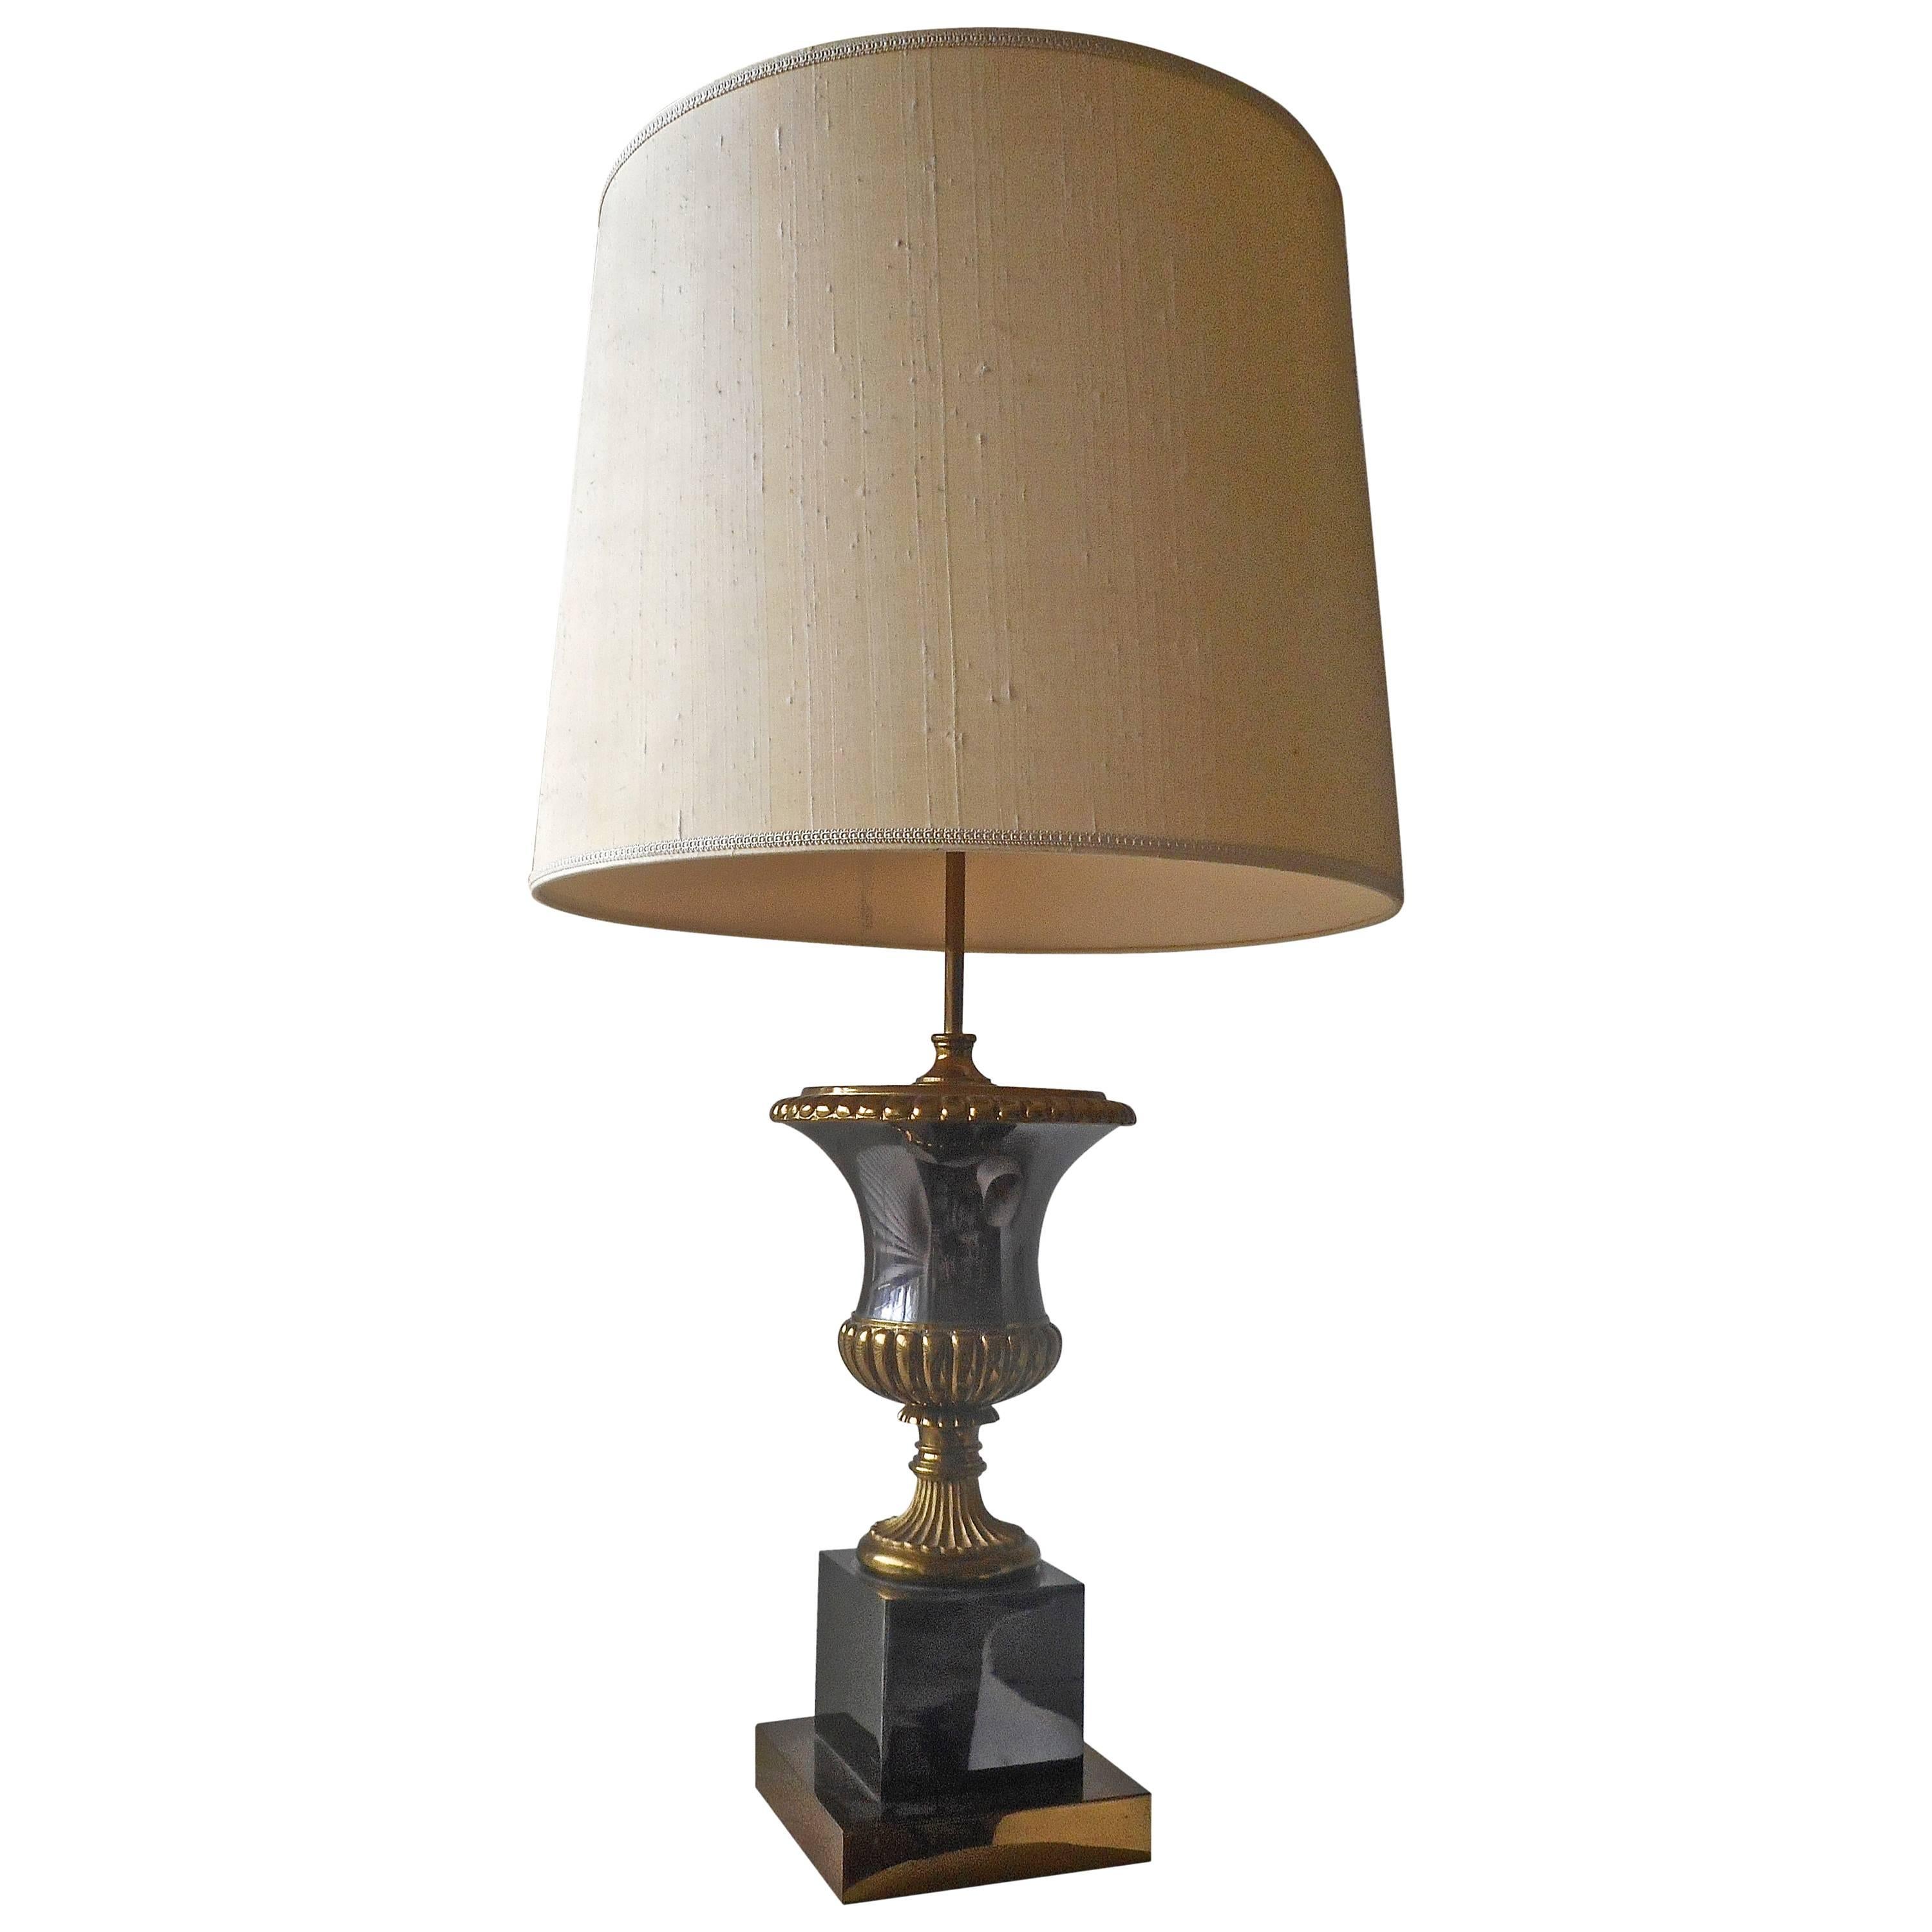 A Large Scale Neoclassical Desk Lamp by Maison Jansen